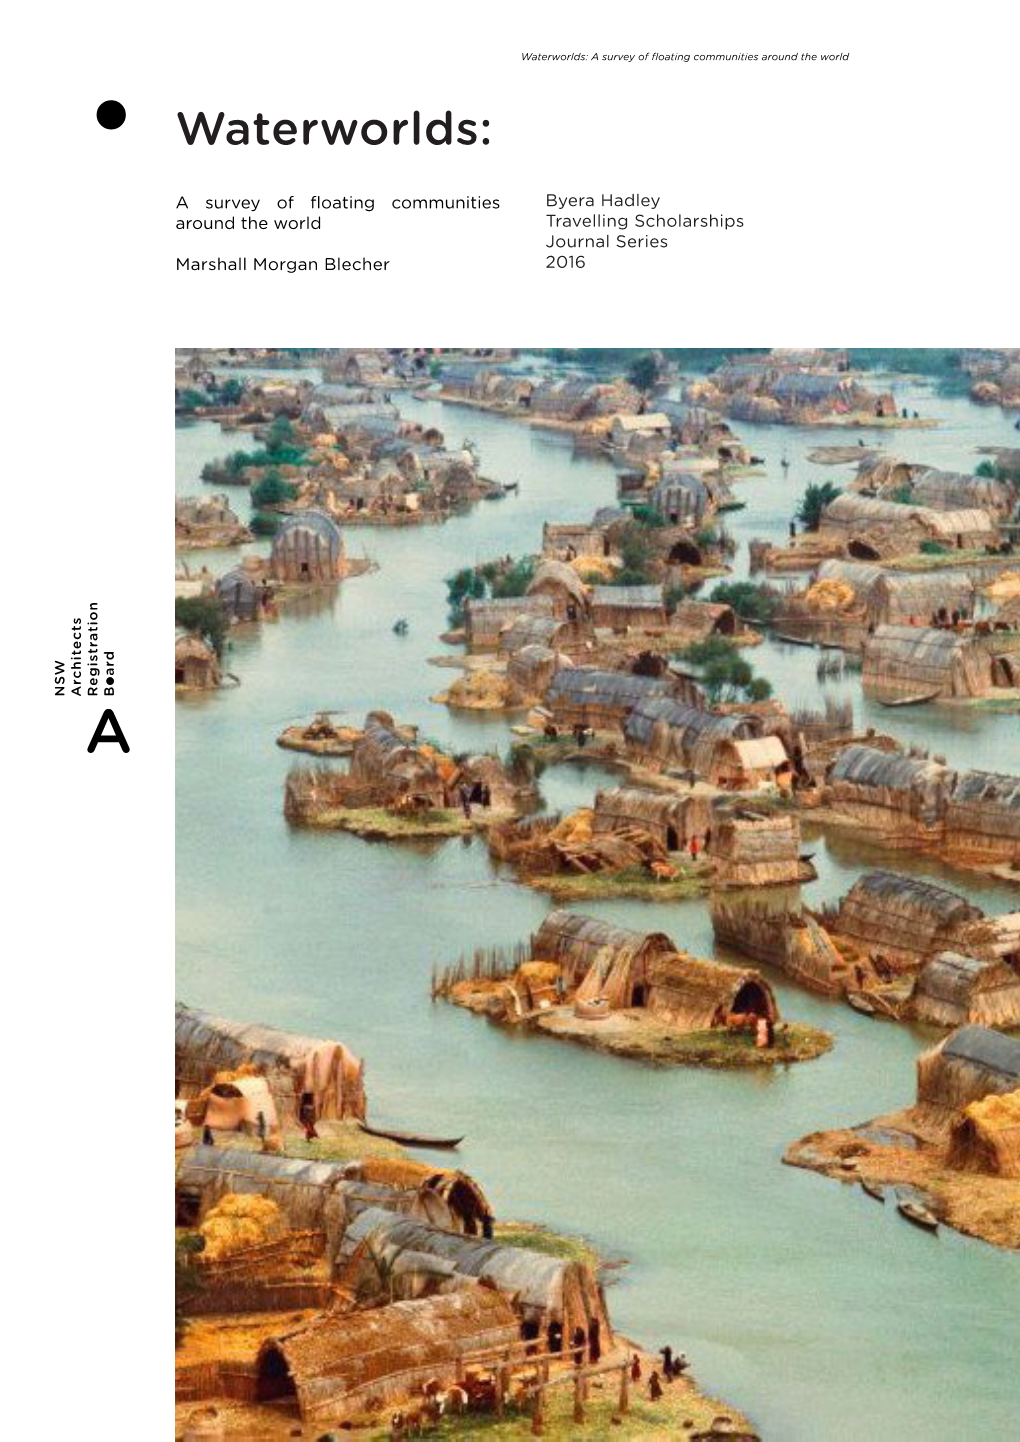 Waterworlds: a Survey of Floating Communities Around the World